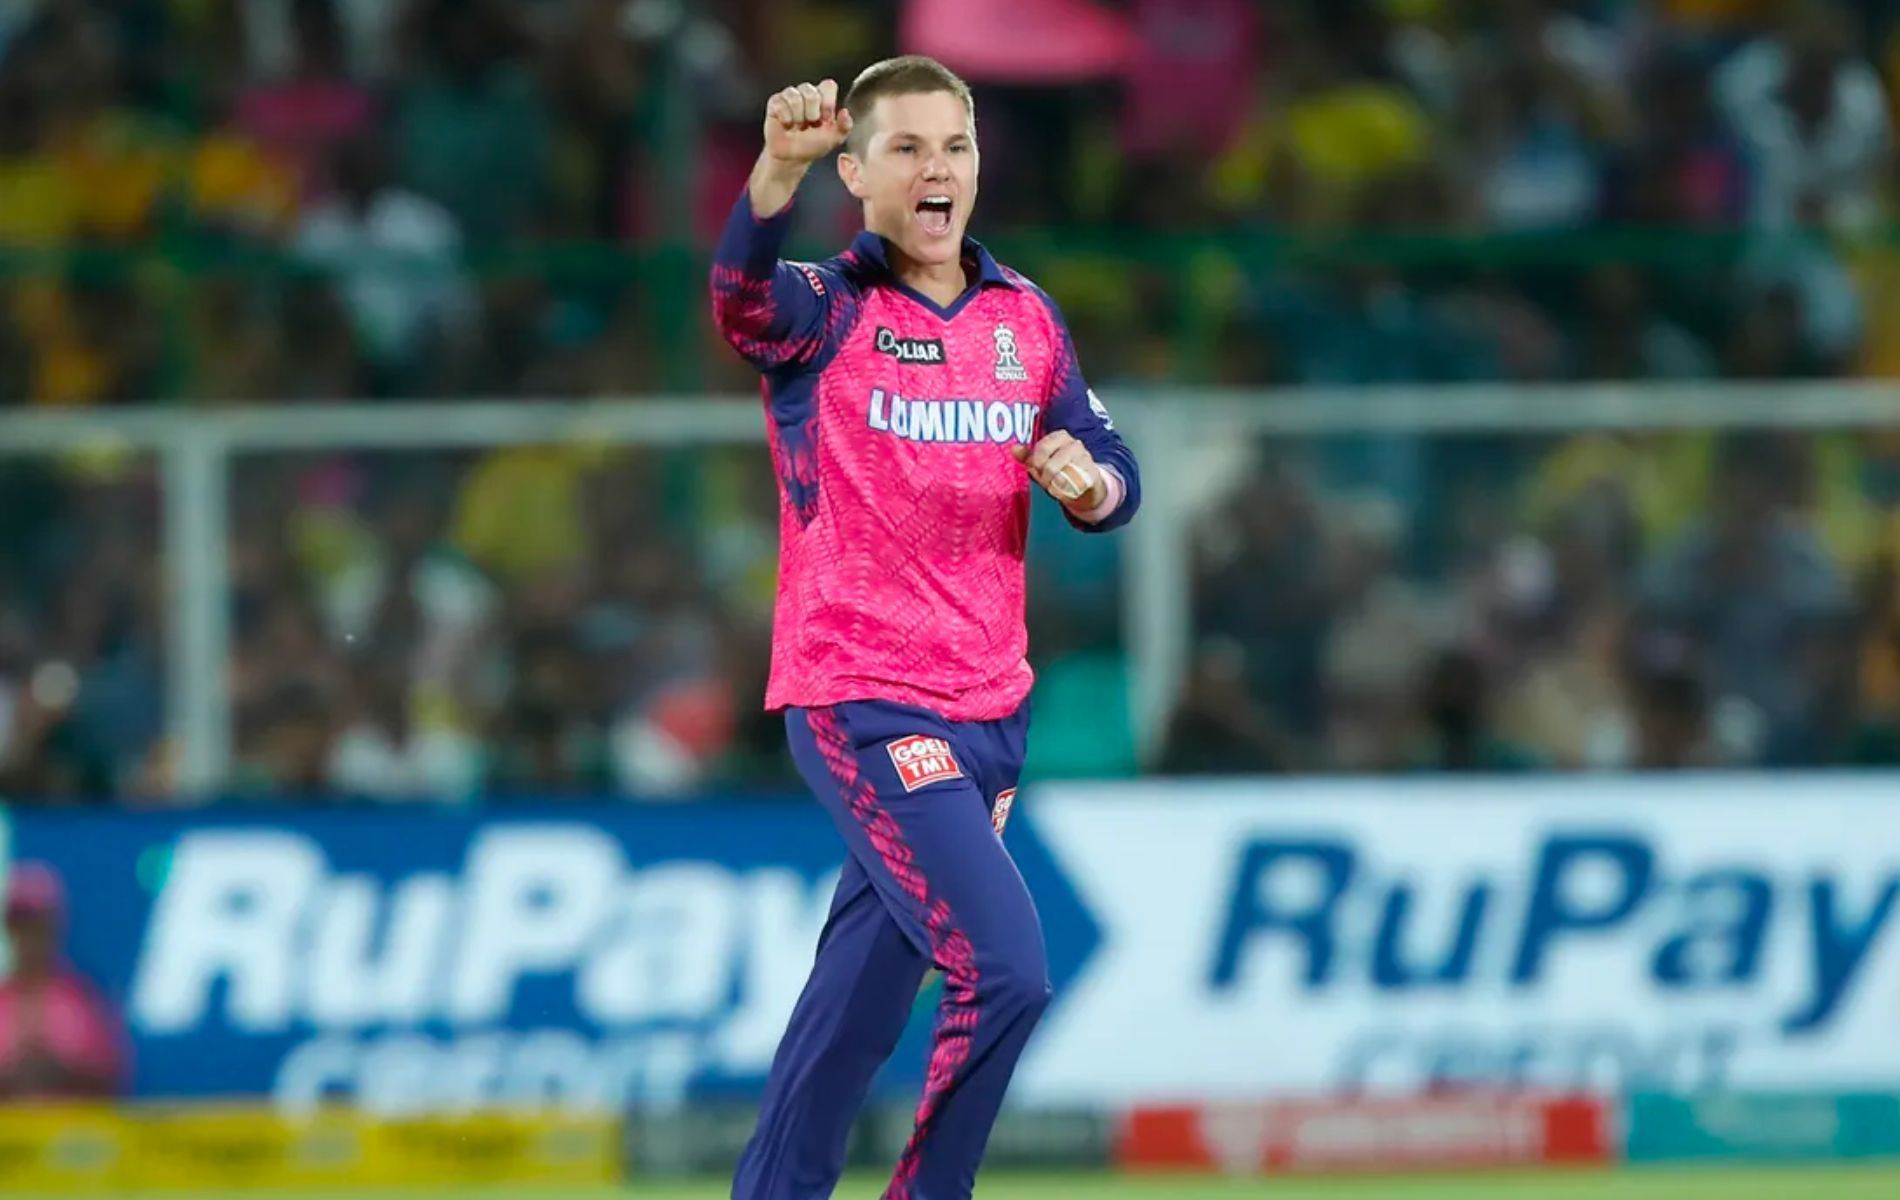 Adam Zampa has picked up five wickets from four matches this season. (Pic: IPLT20.com)